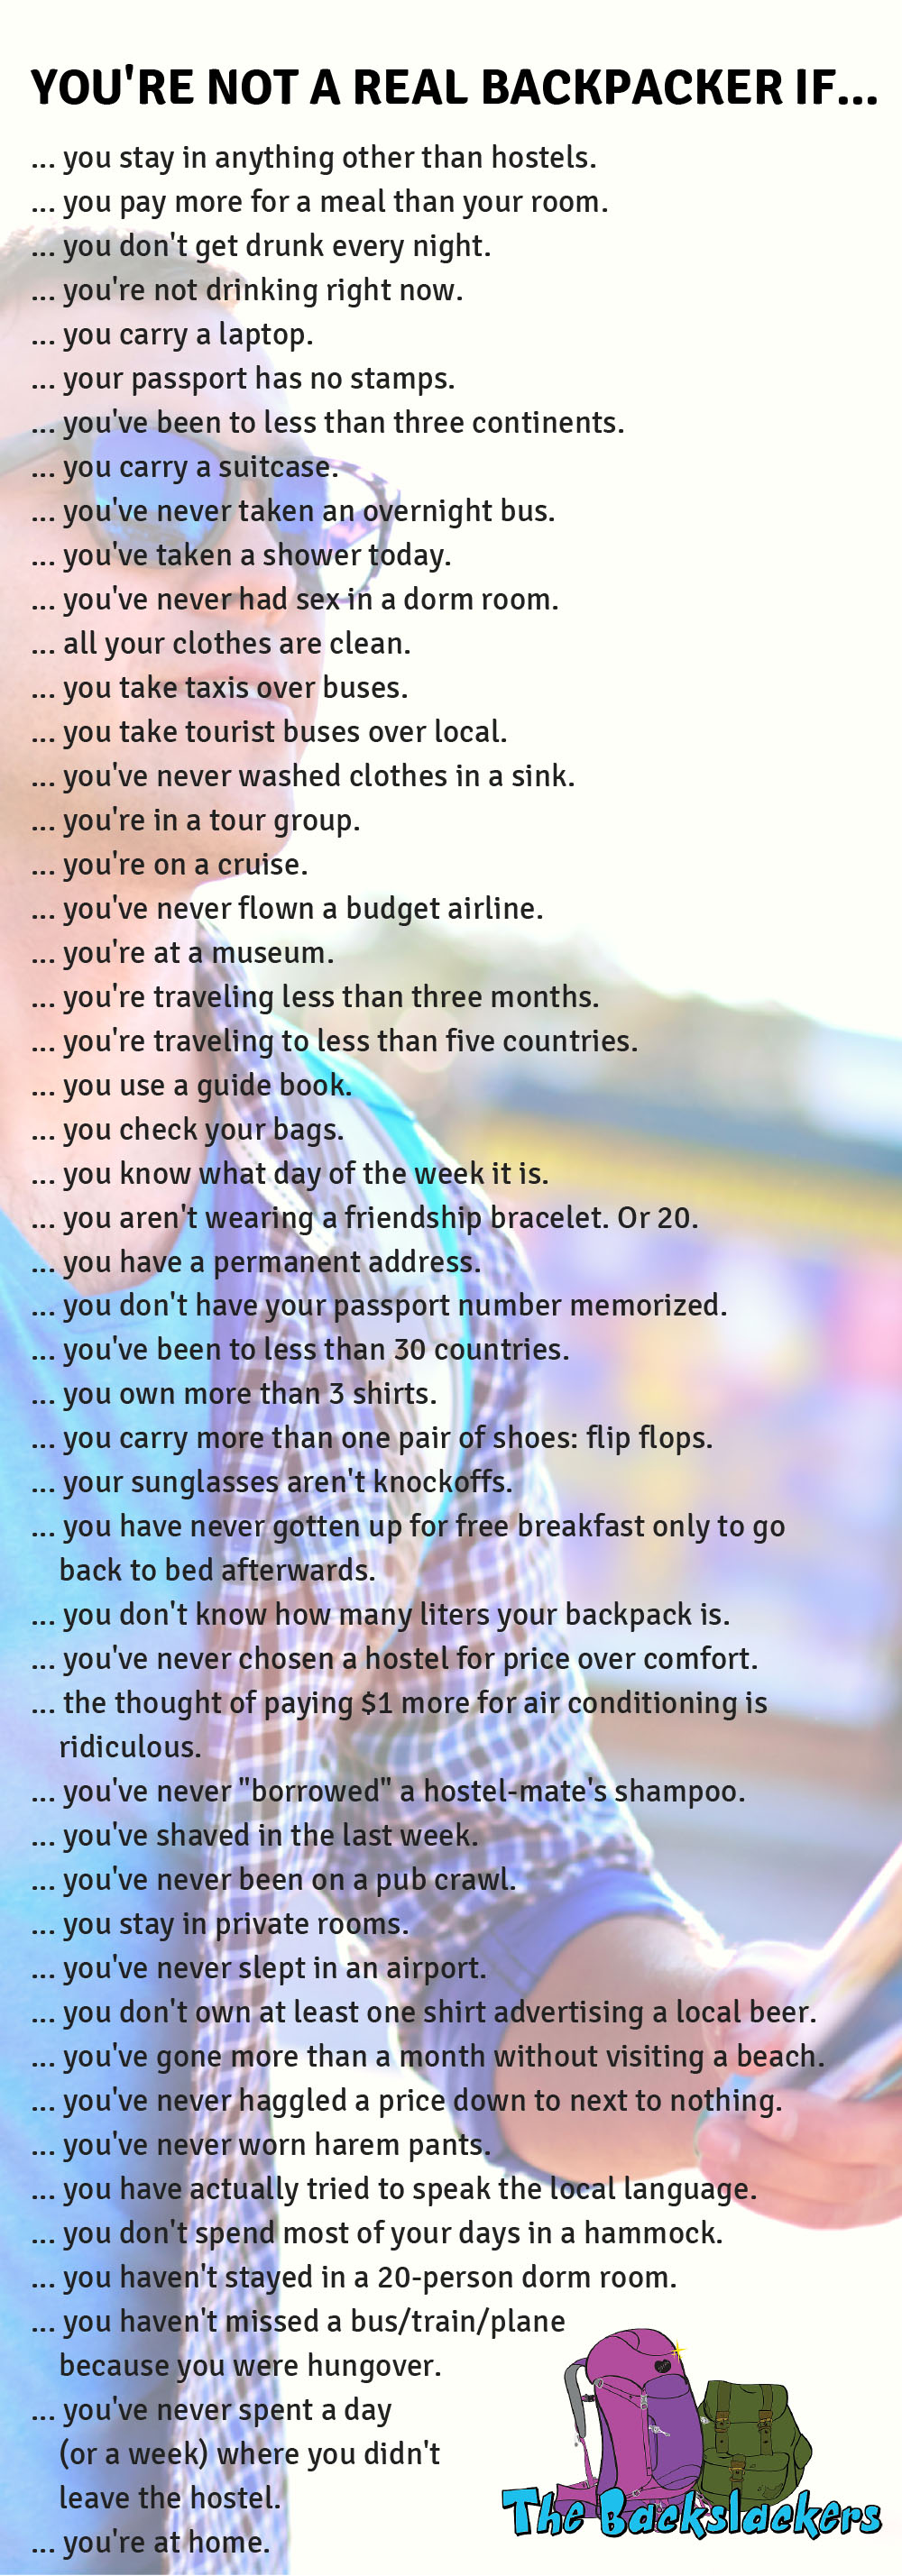 You're not a real backpacker if...